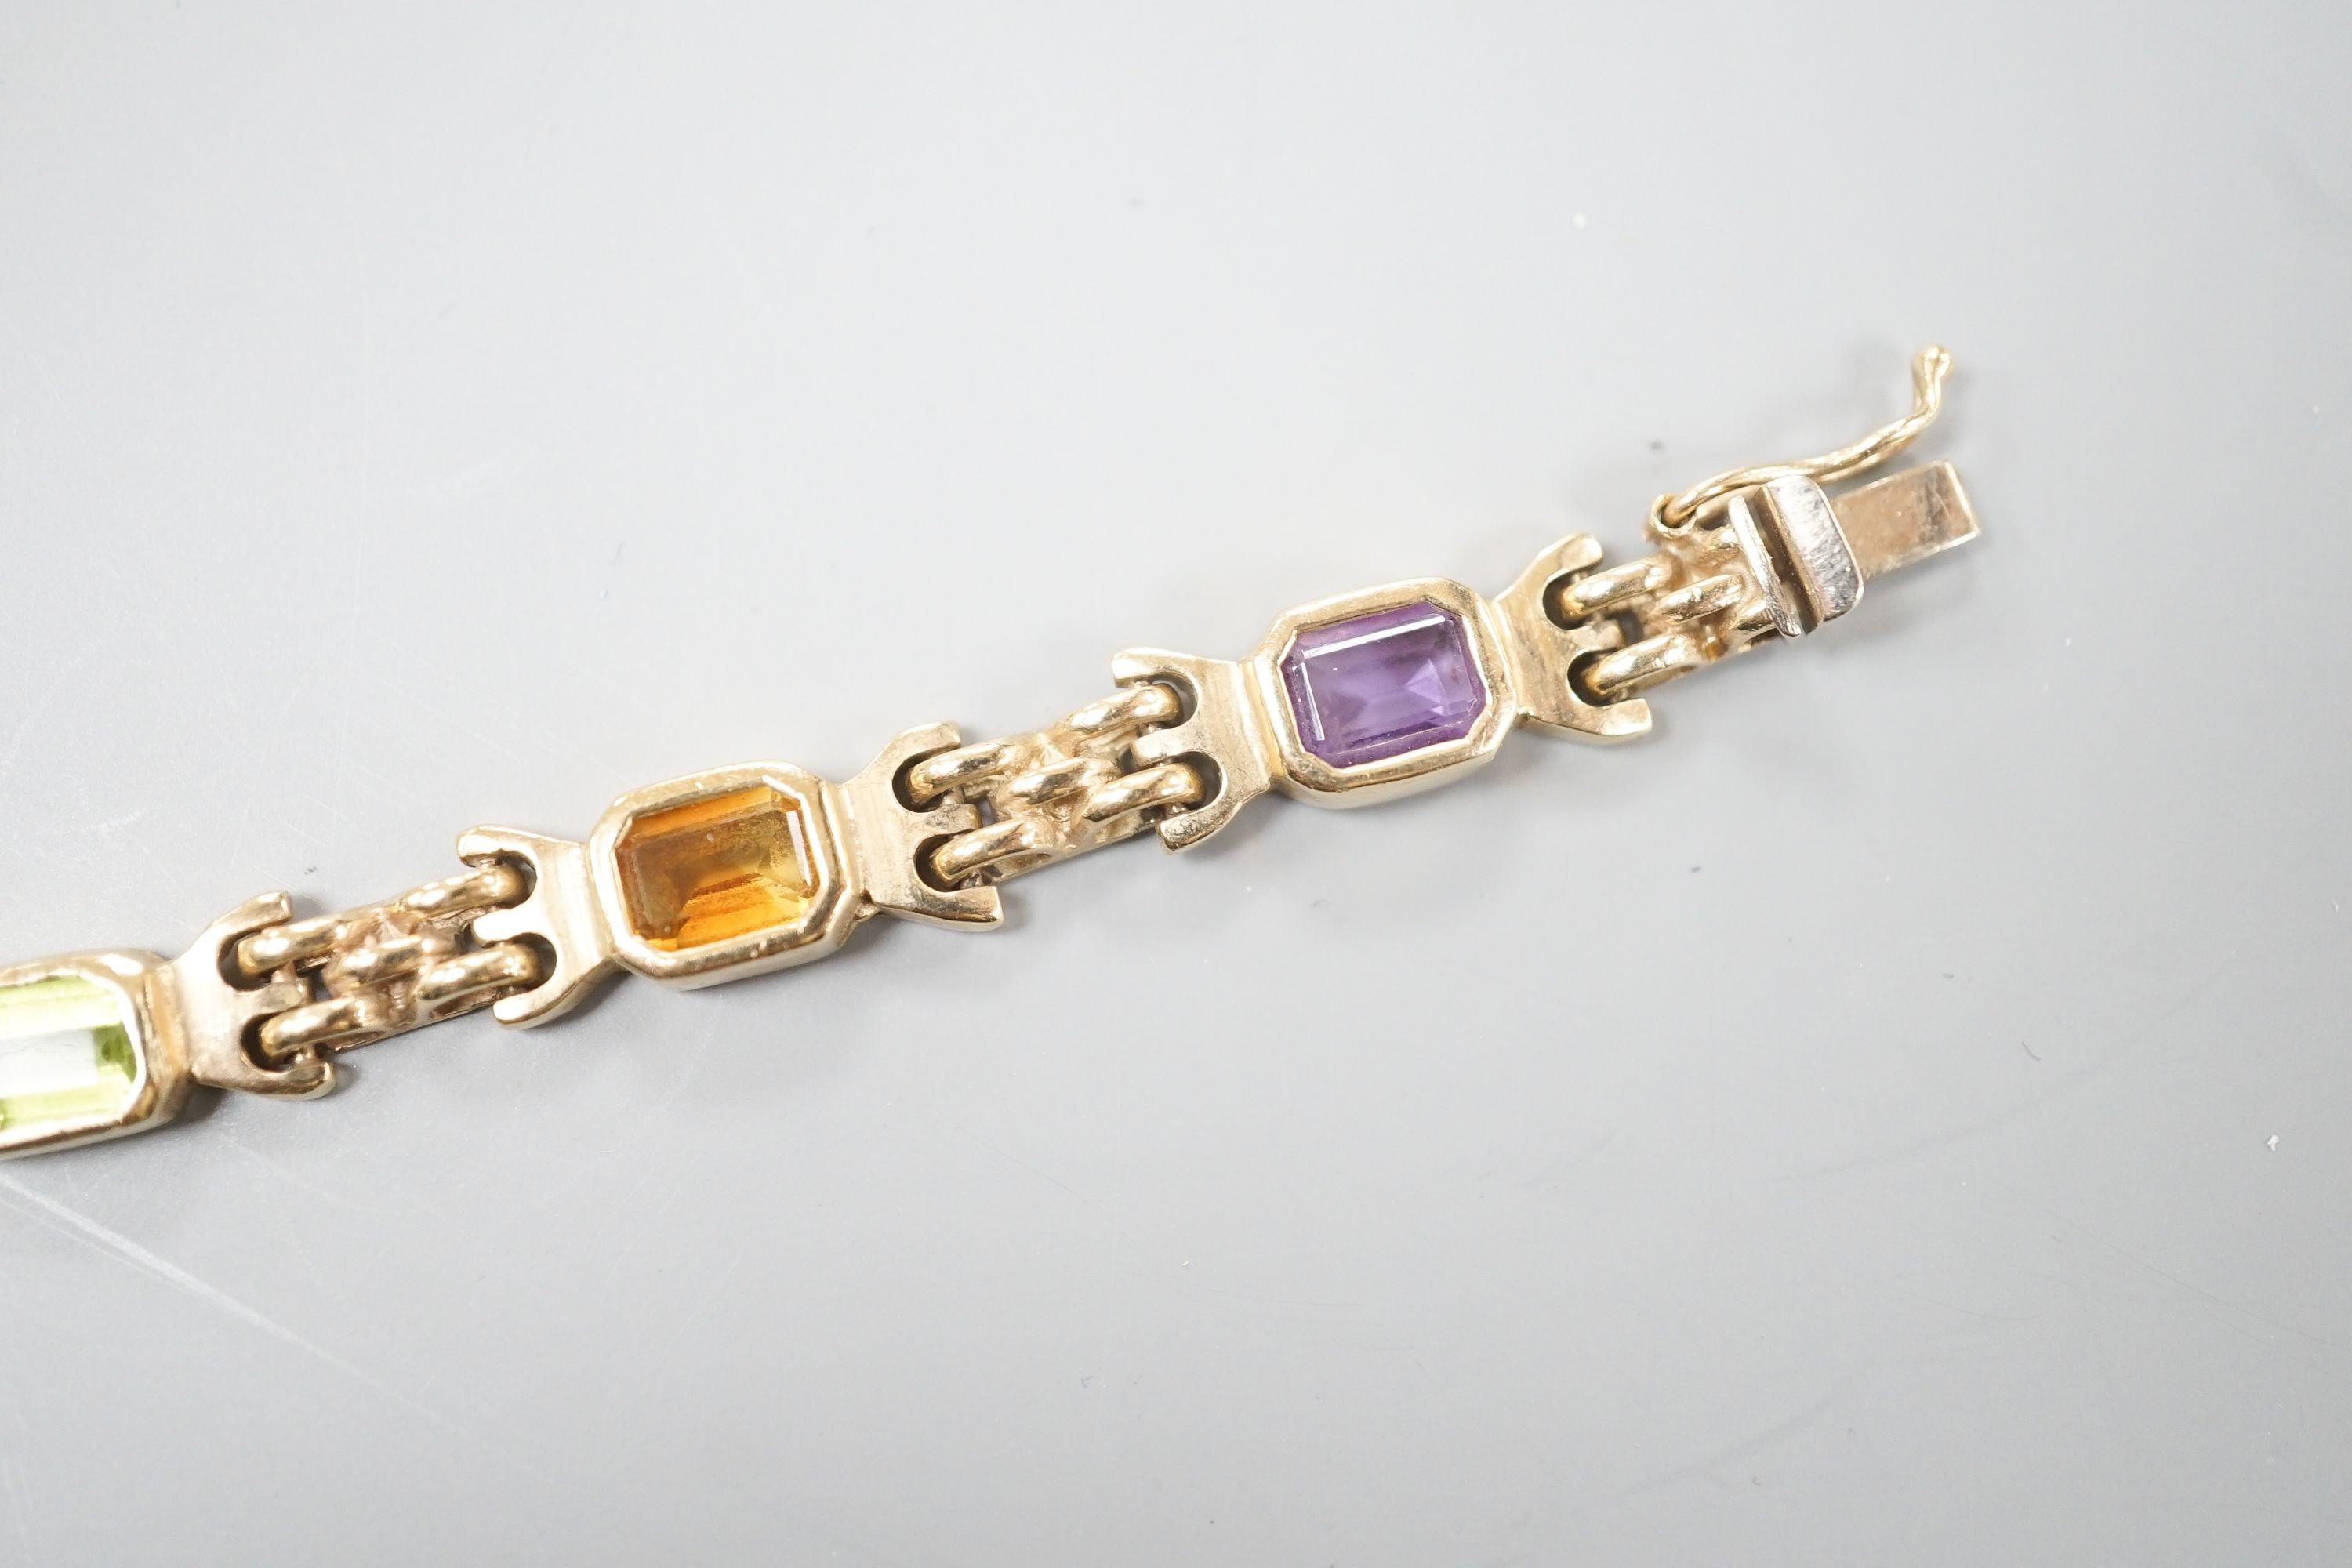 A modern 9ct gold and gem set bracelet and four assorted 9ct gold dress rings, gross 24.8 grams